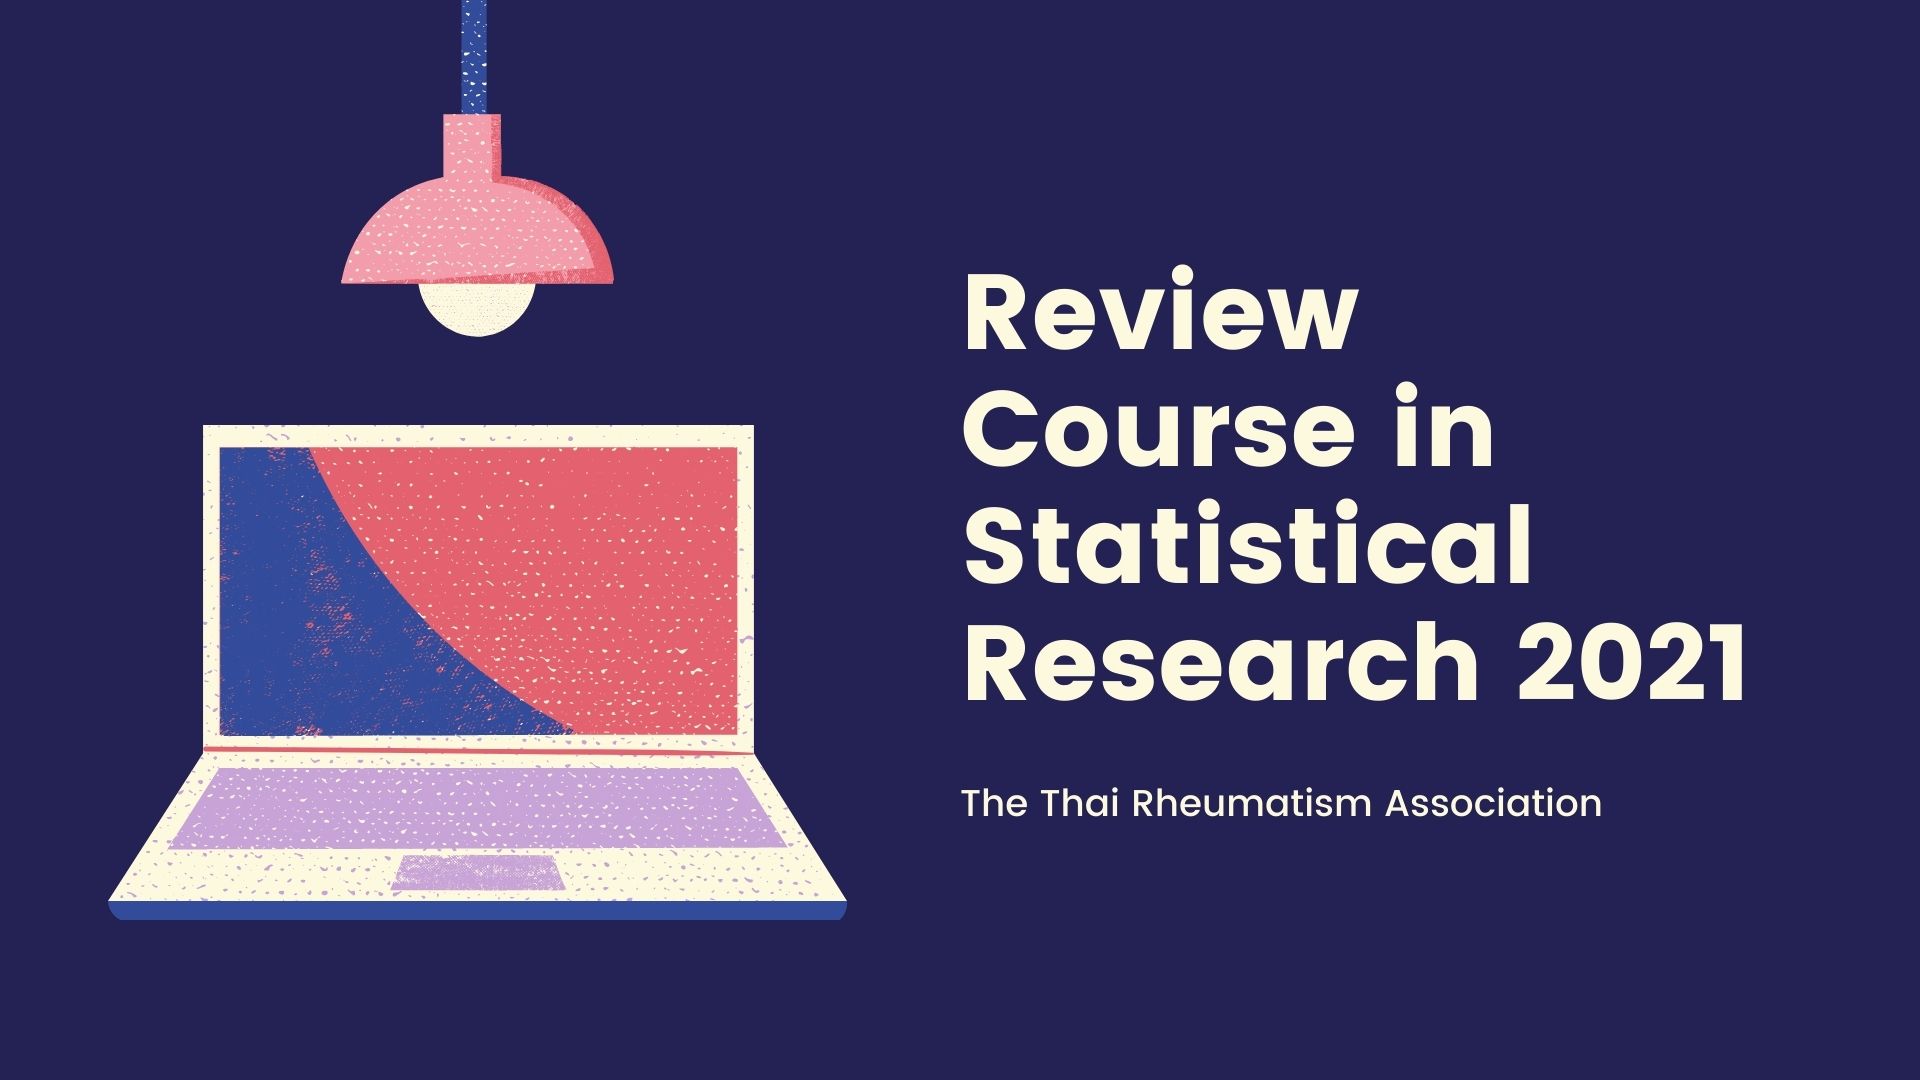 Review Course in Statistic Research 2022